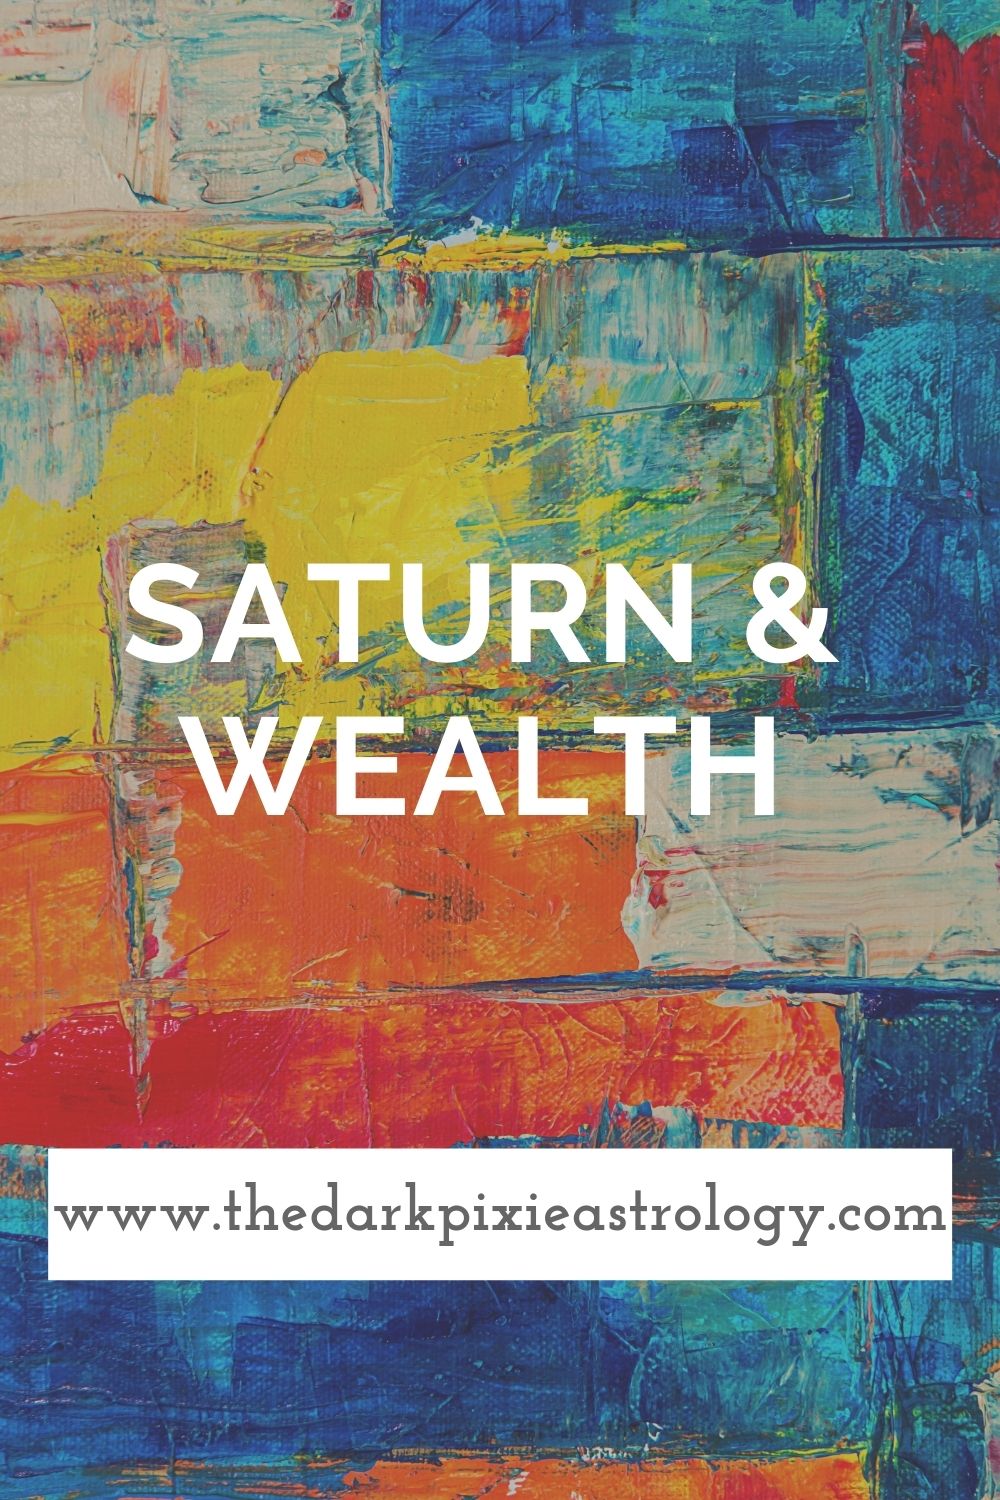 Does Saturn give wealth?